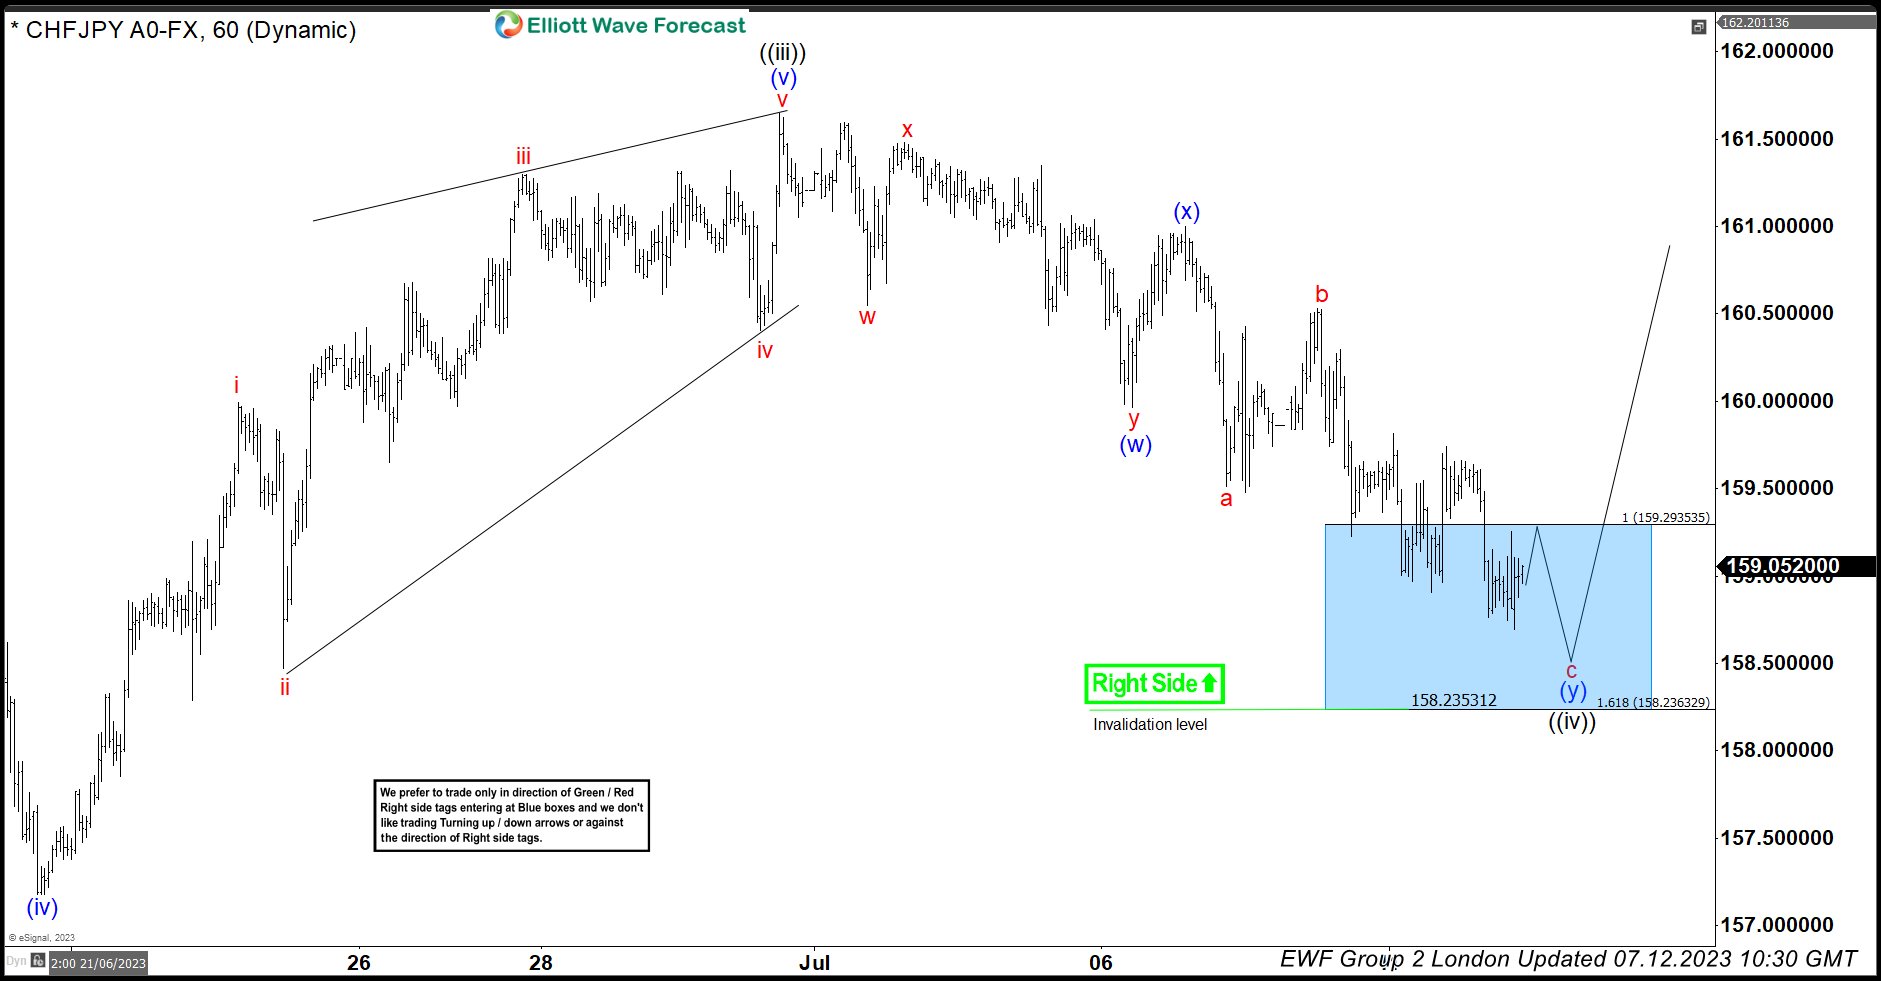 CHFJPY Strong Rally From The Elliott Wave Blue Box Area